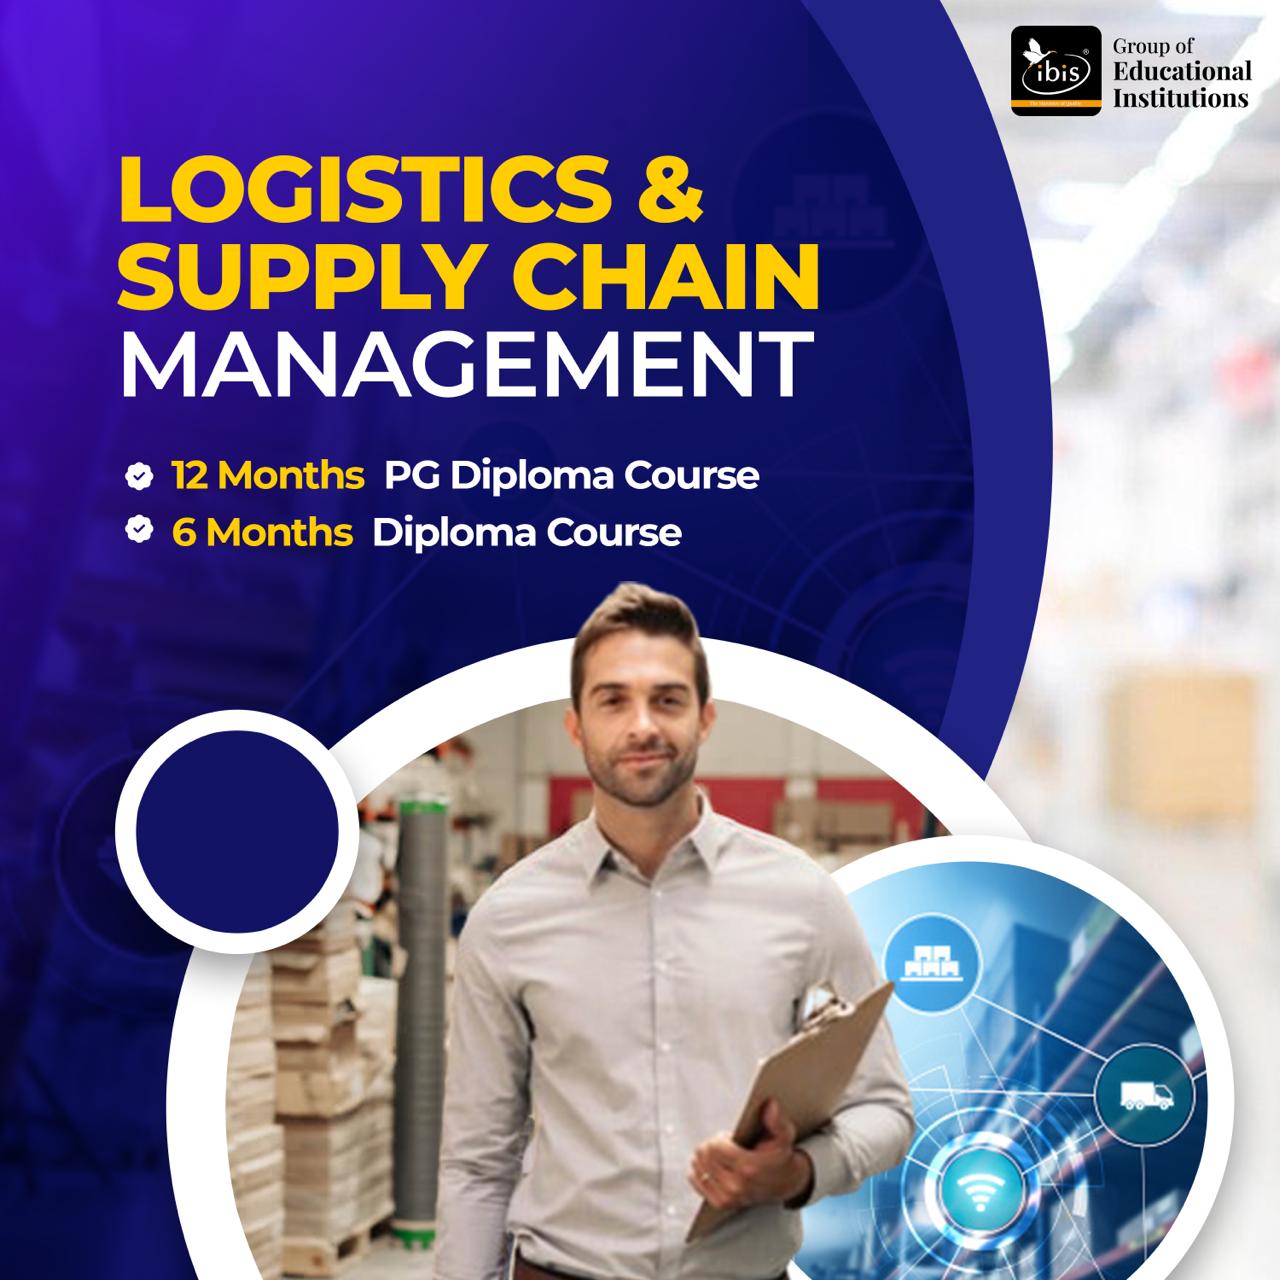  Logistics and Supply Chain Management Courses